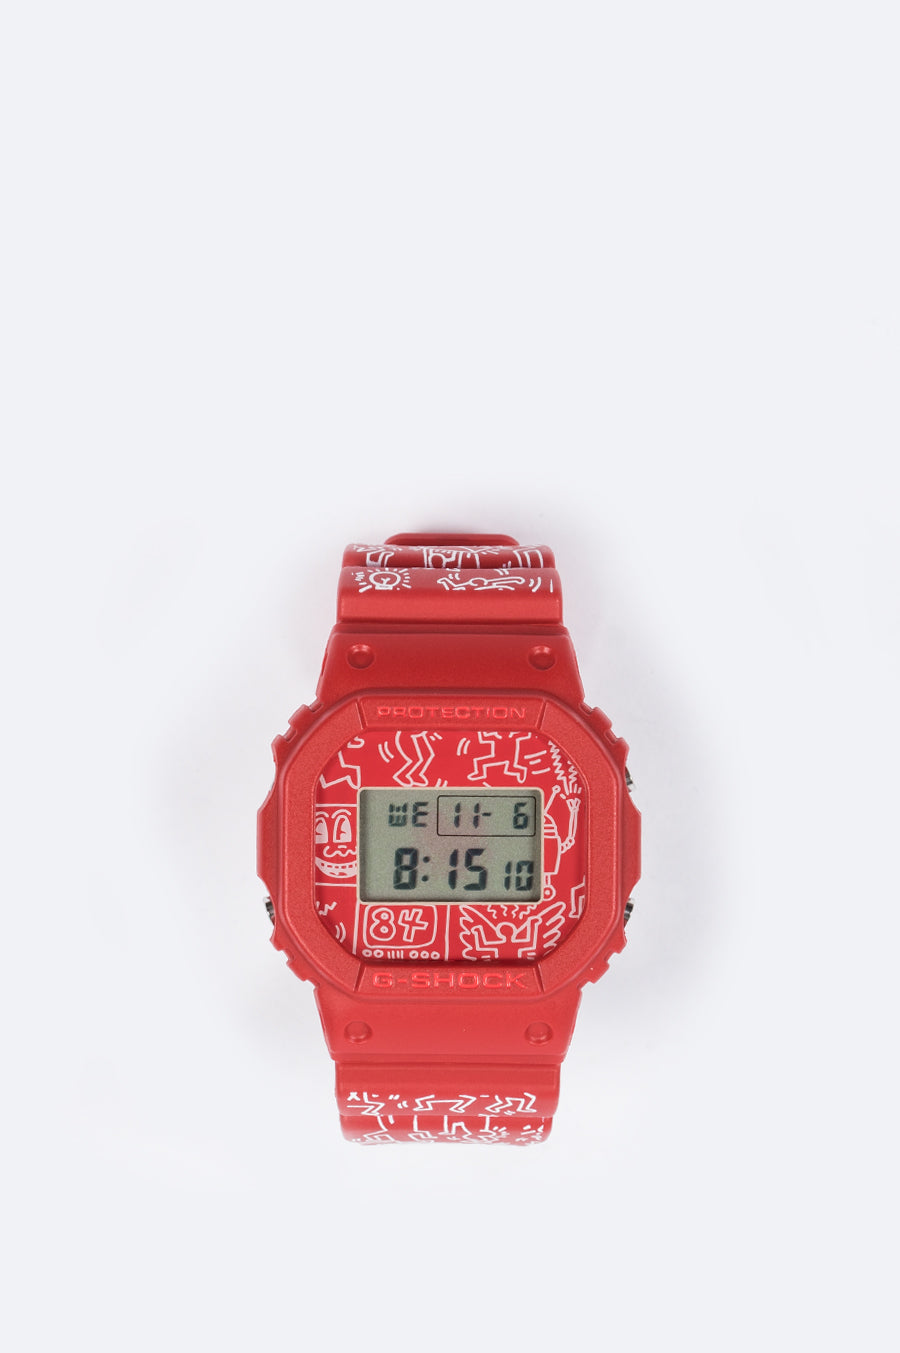 G-SHOCK x KEITH HARING DW-5600 RED - BLENDS